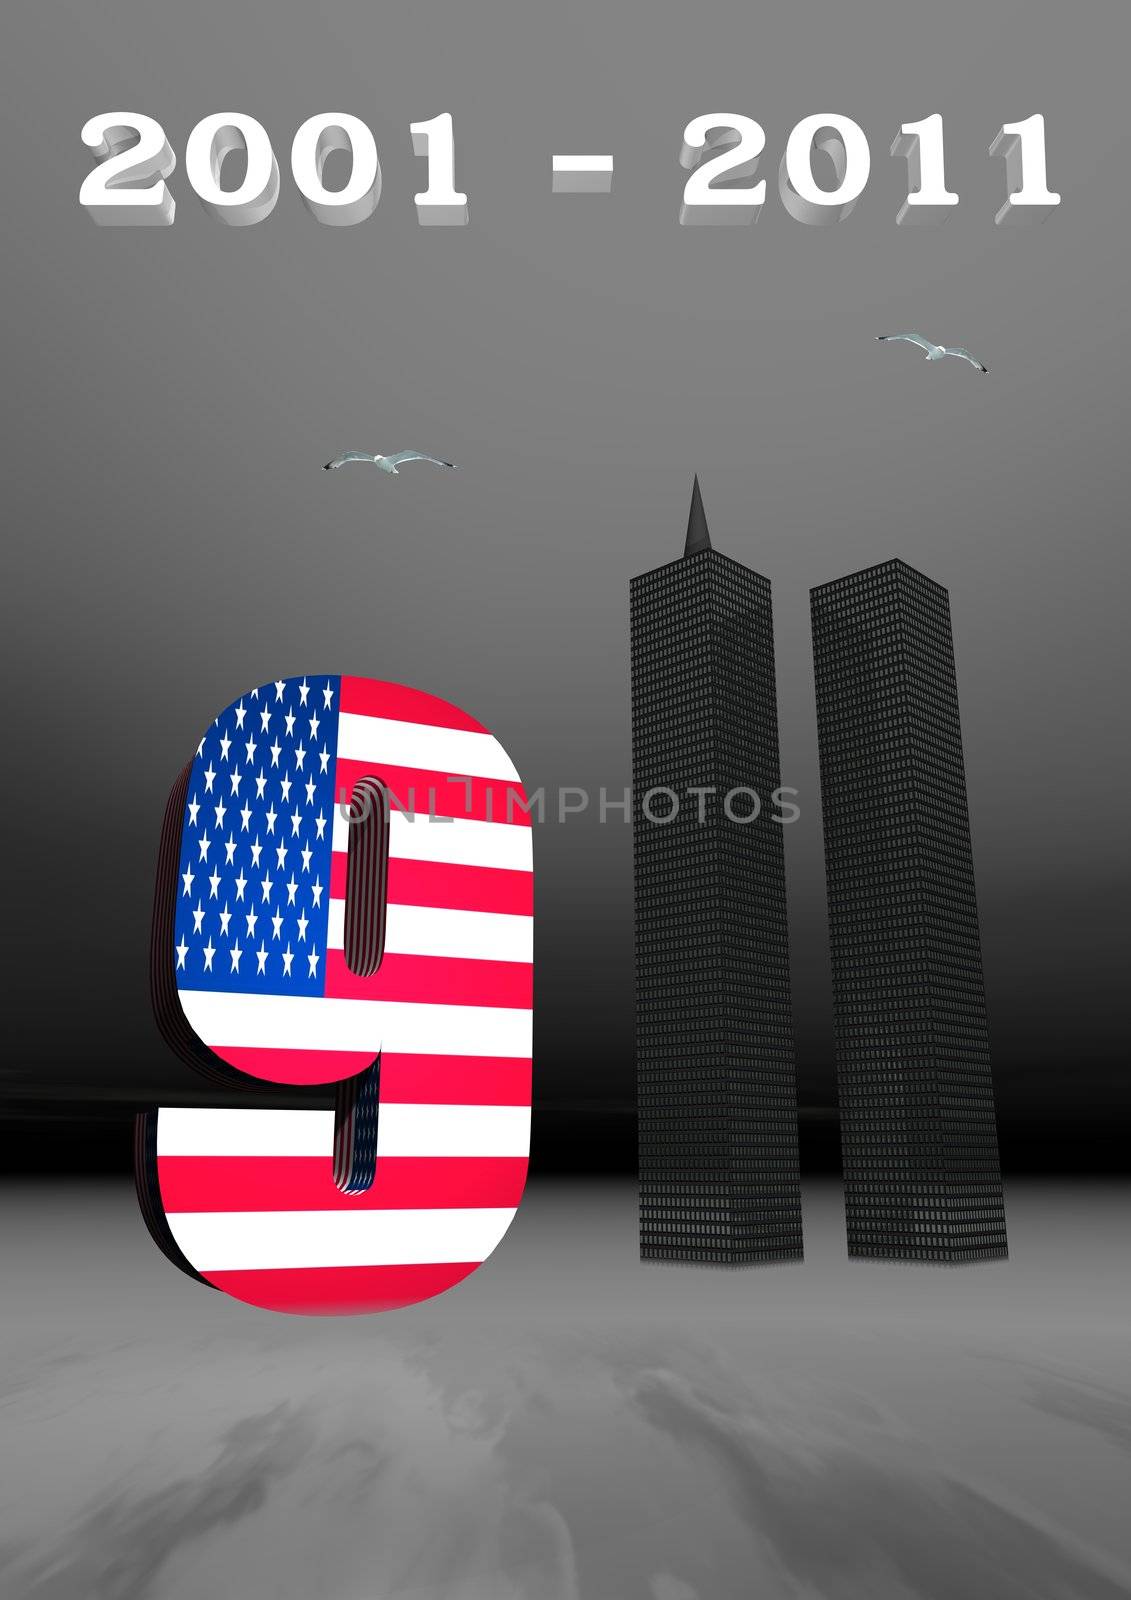 USA flag and World Trade Center twin tower buildings for 9 - 11, 3D illustration for remembrance